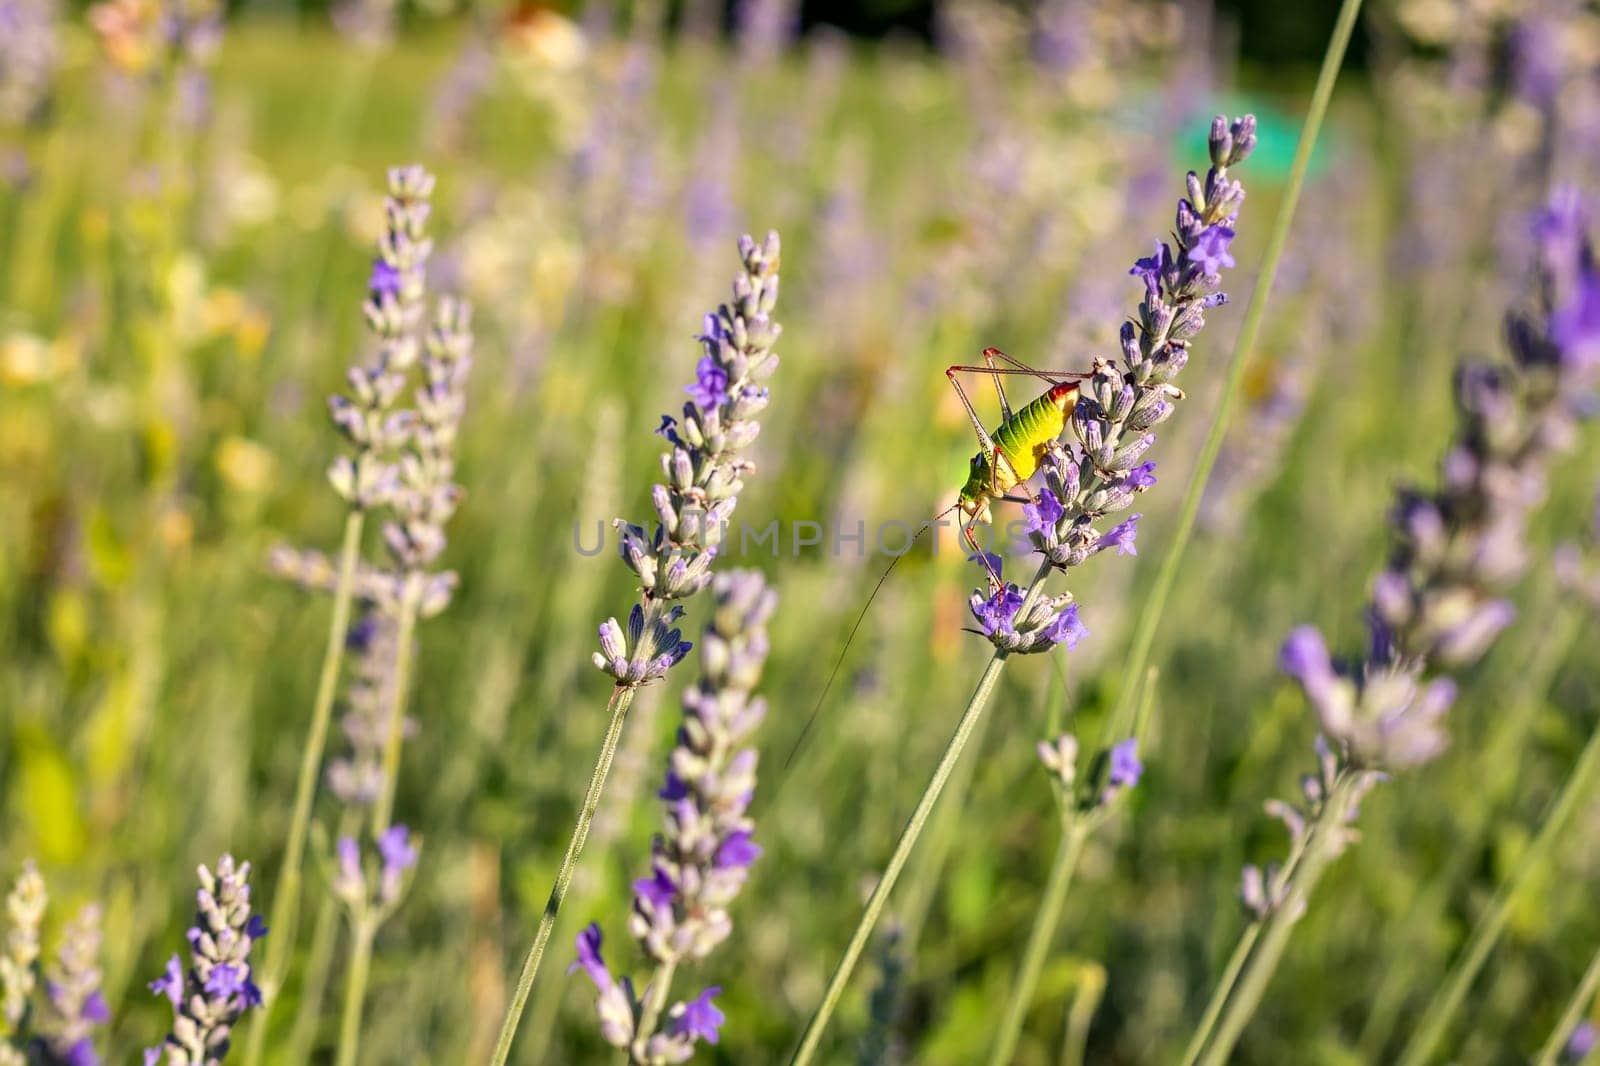  A colorful grasshopper sits on a lavender flower. by EdVal